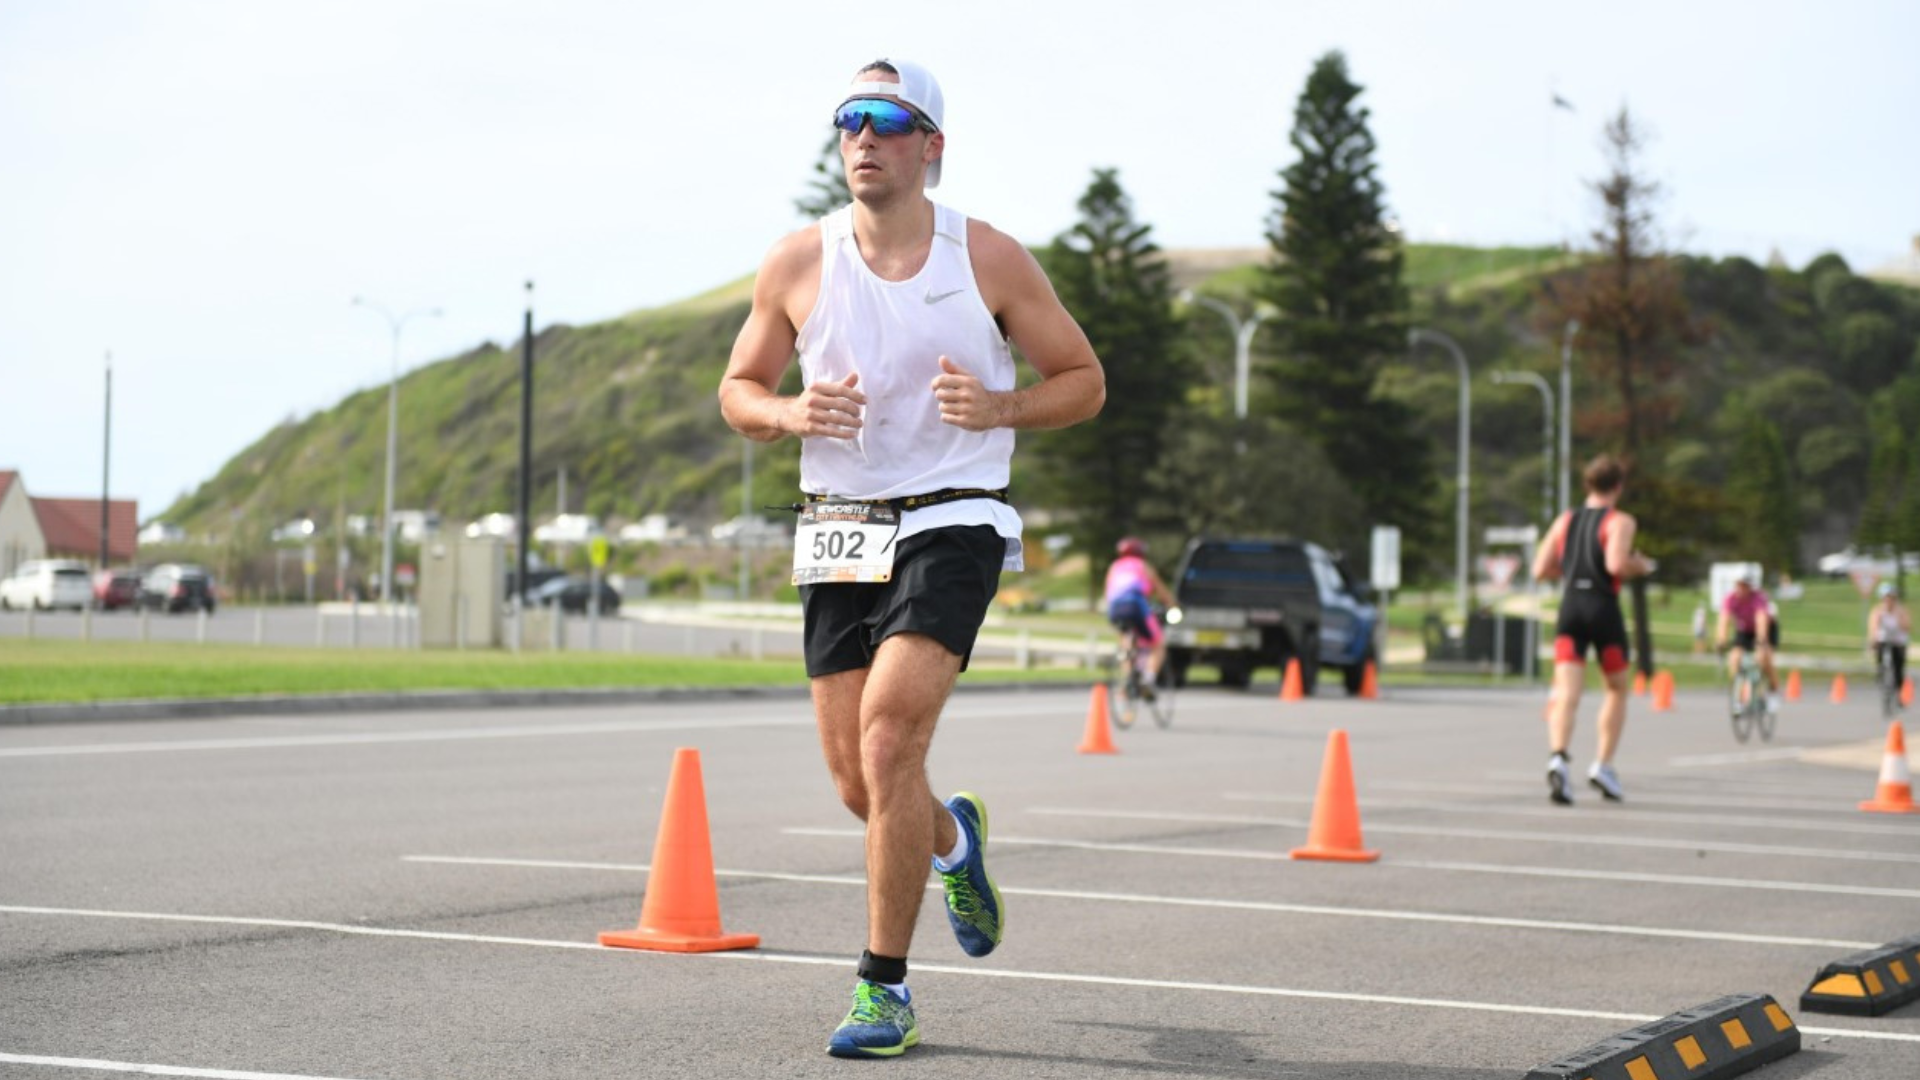 Michael competing in the Newcastle City Triathlon. (Source: supplied)